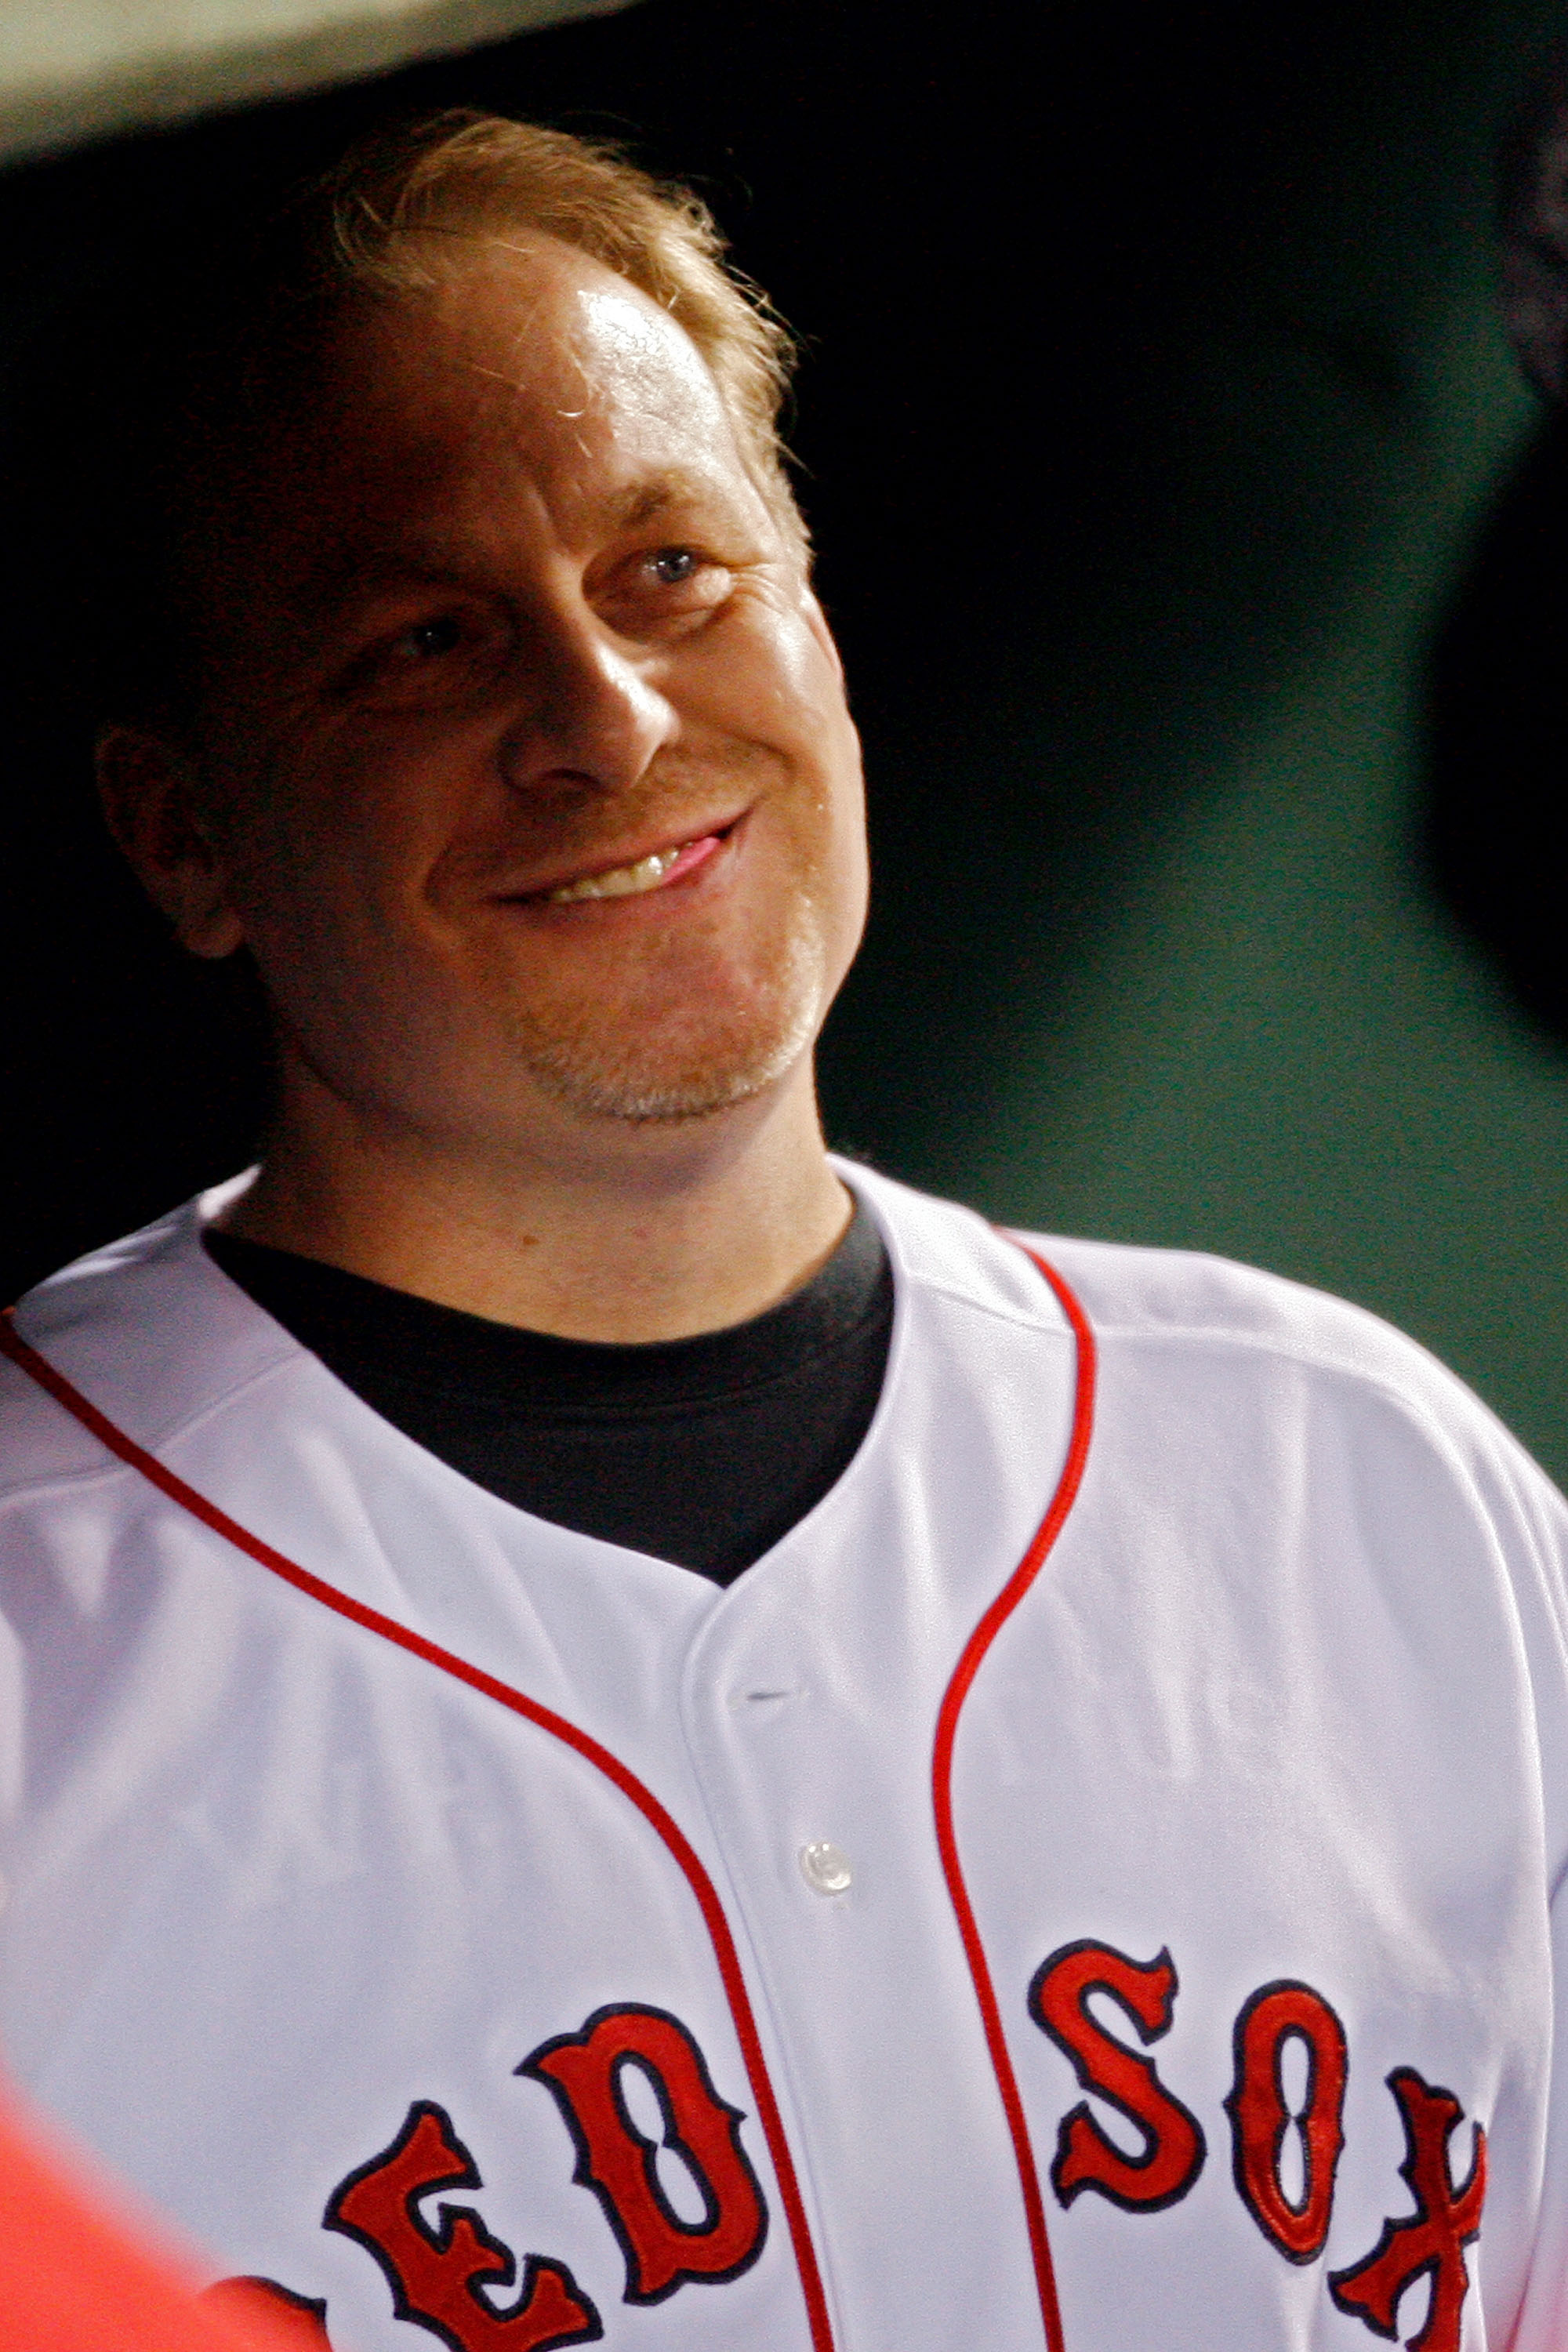 BOSTON - OCTOBER 16:  Curt Schilling of the Boston Red Sox looks on before game five of the American League Championship Series against the Tampa Bay Rays during the 2008 MLB playoffs at Fenway Park on October 16, 2008 in Boston, Massachusetts.  (Photo by